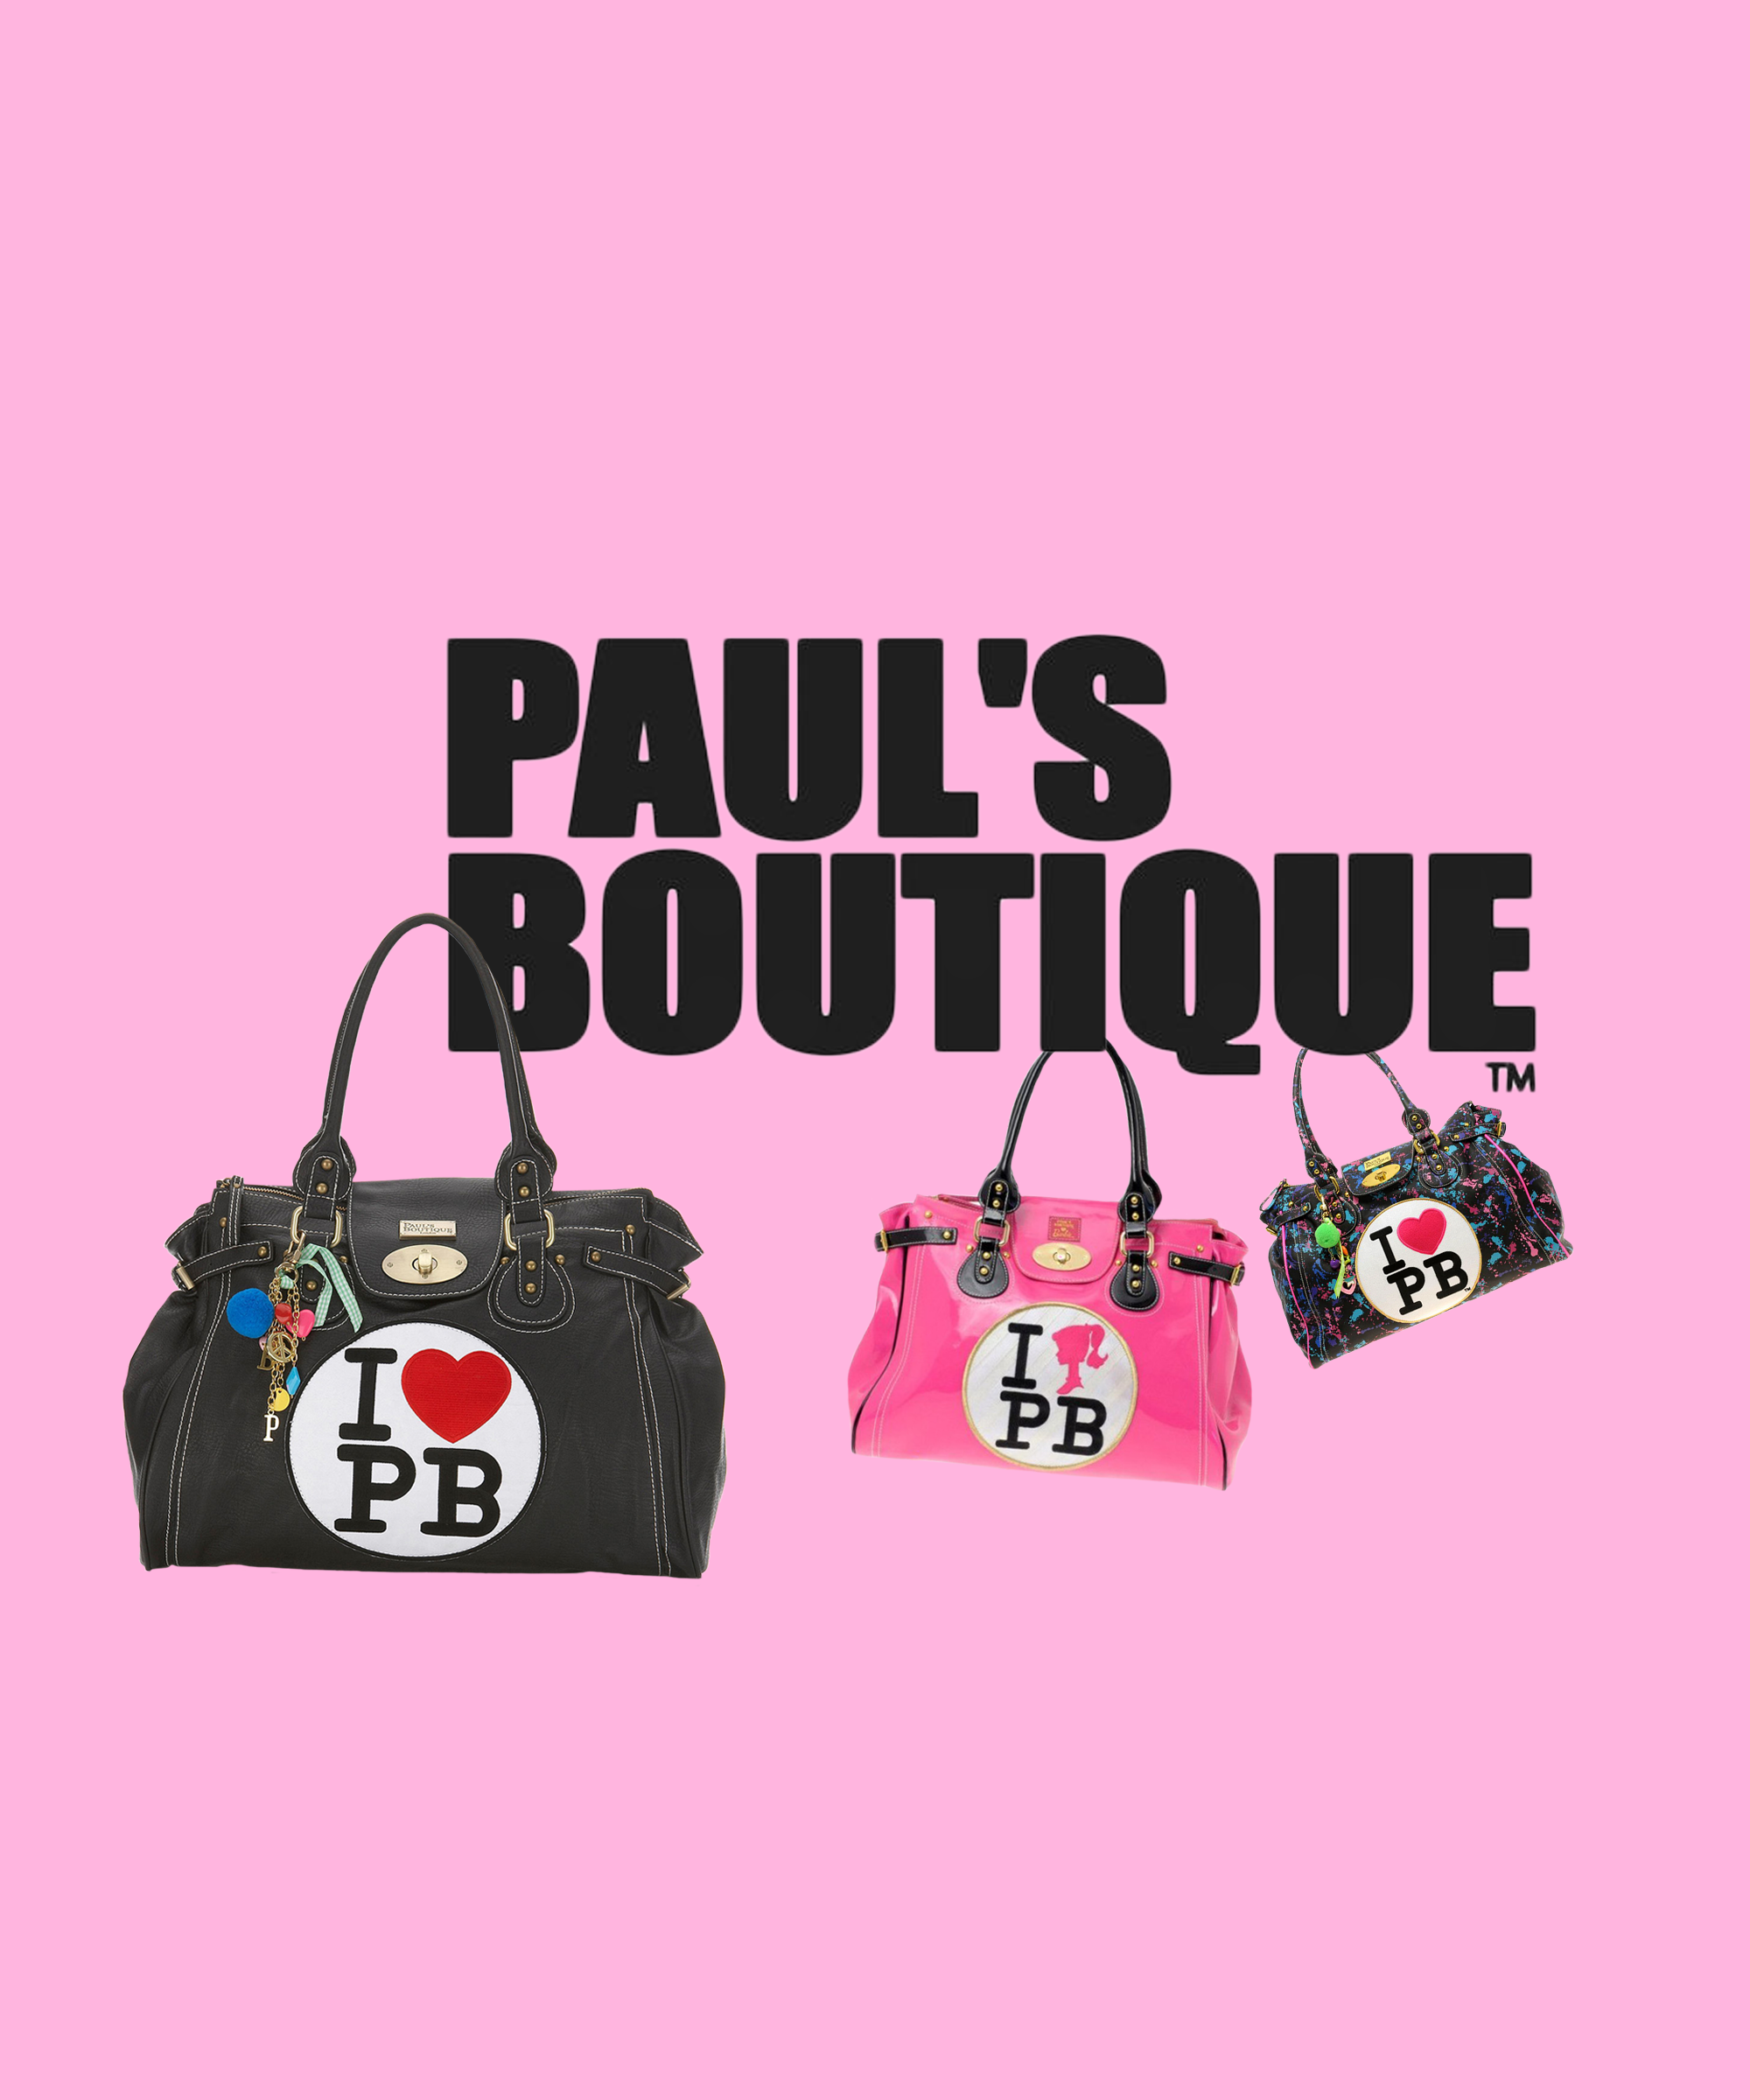 Paul's Boutique TH added a new photo - Paul's Boutique TH